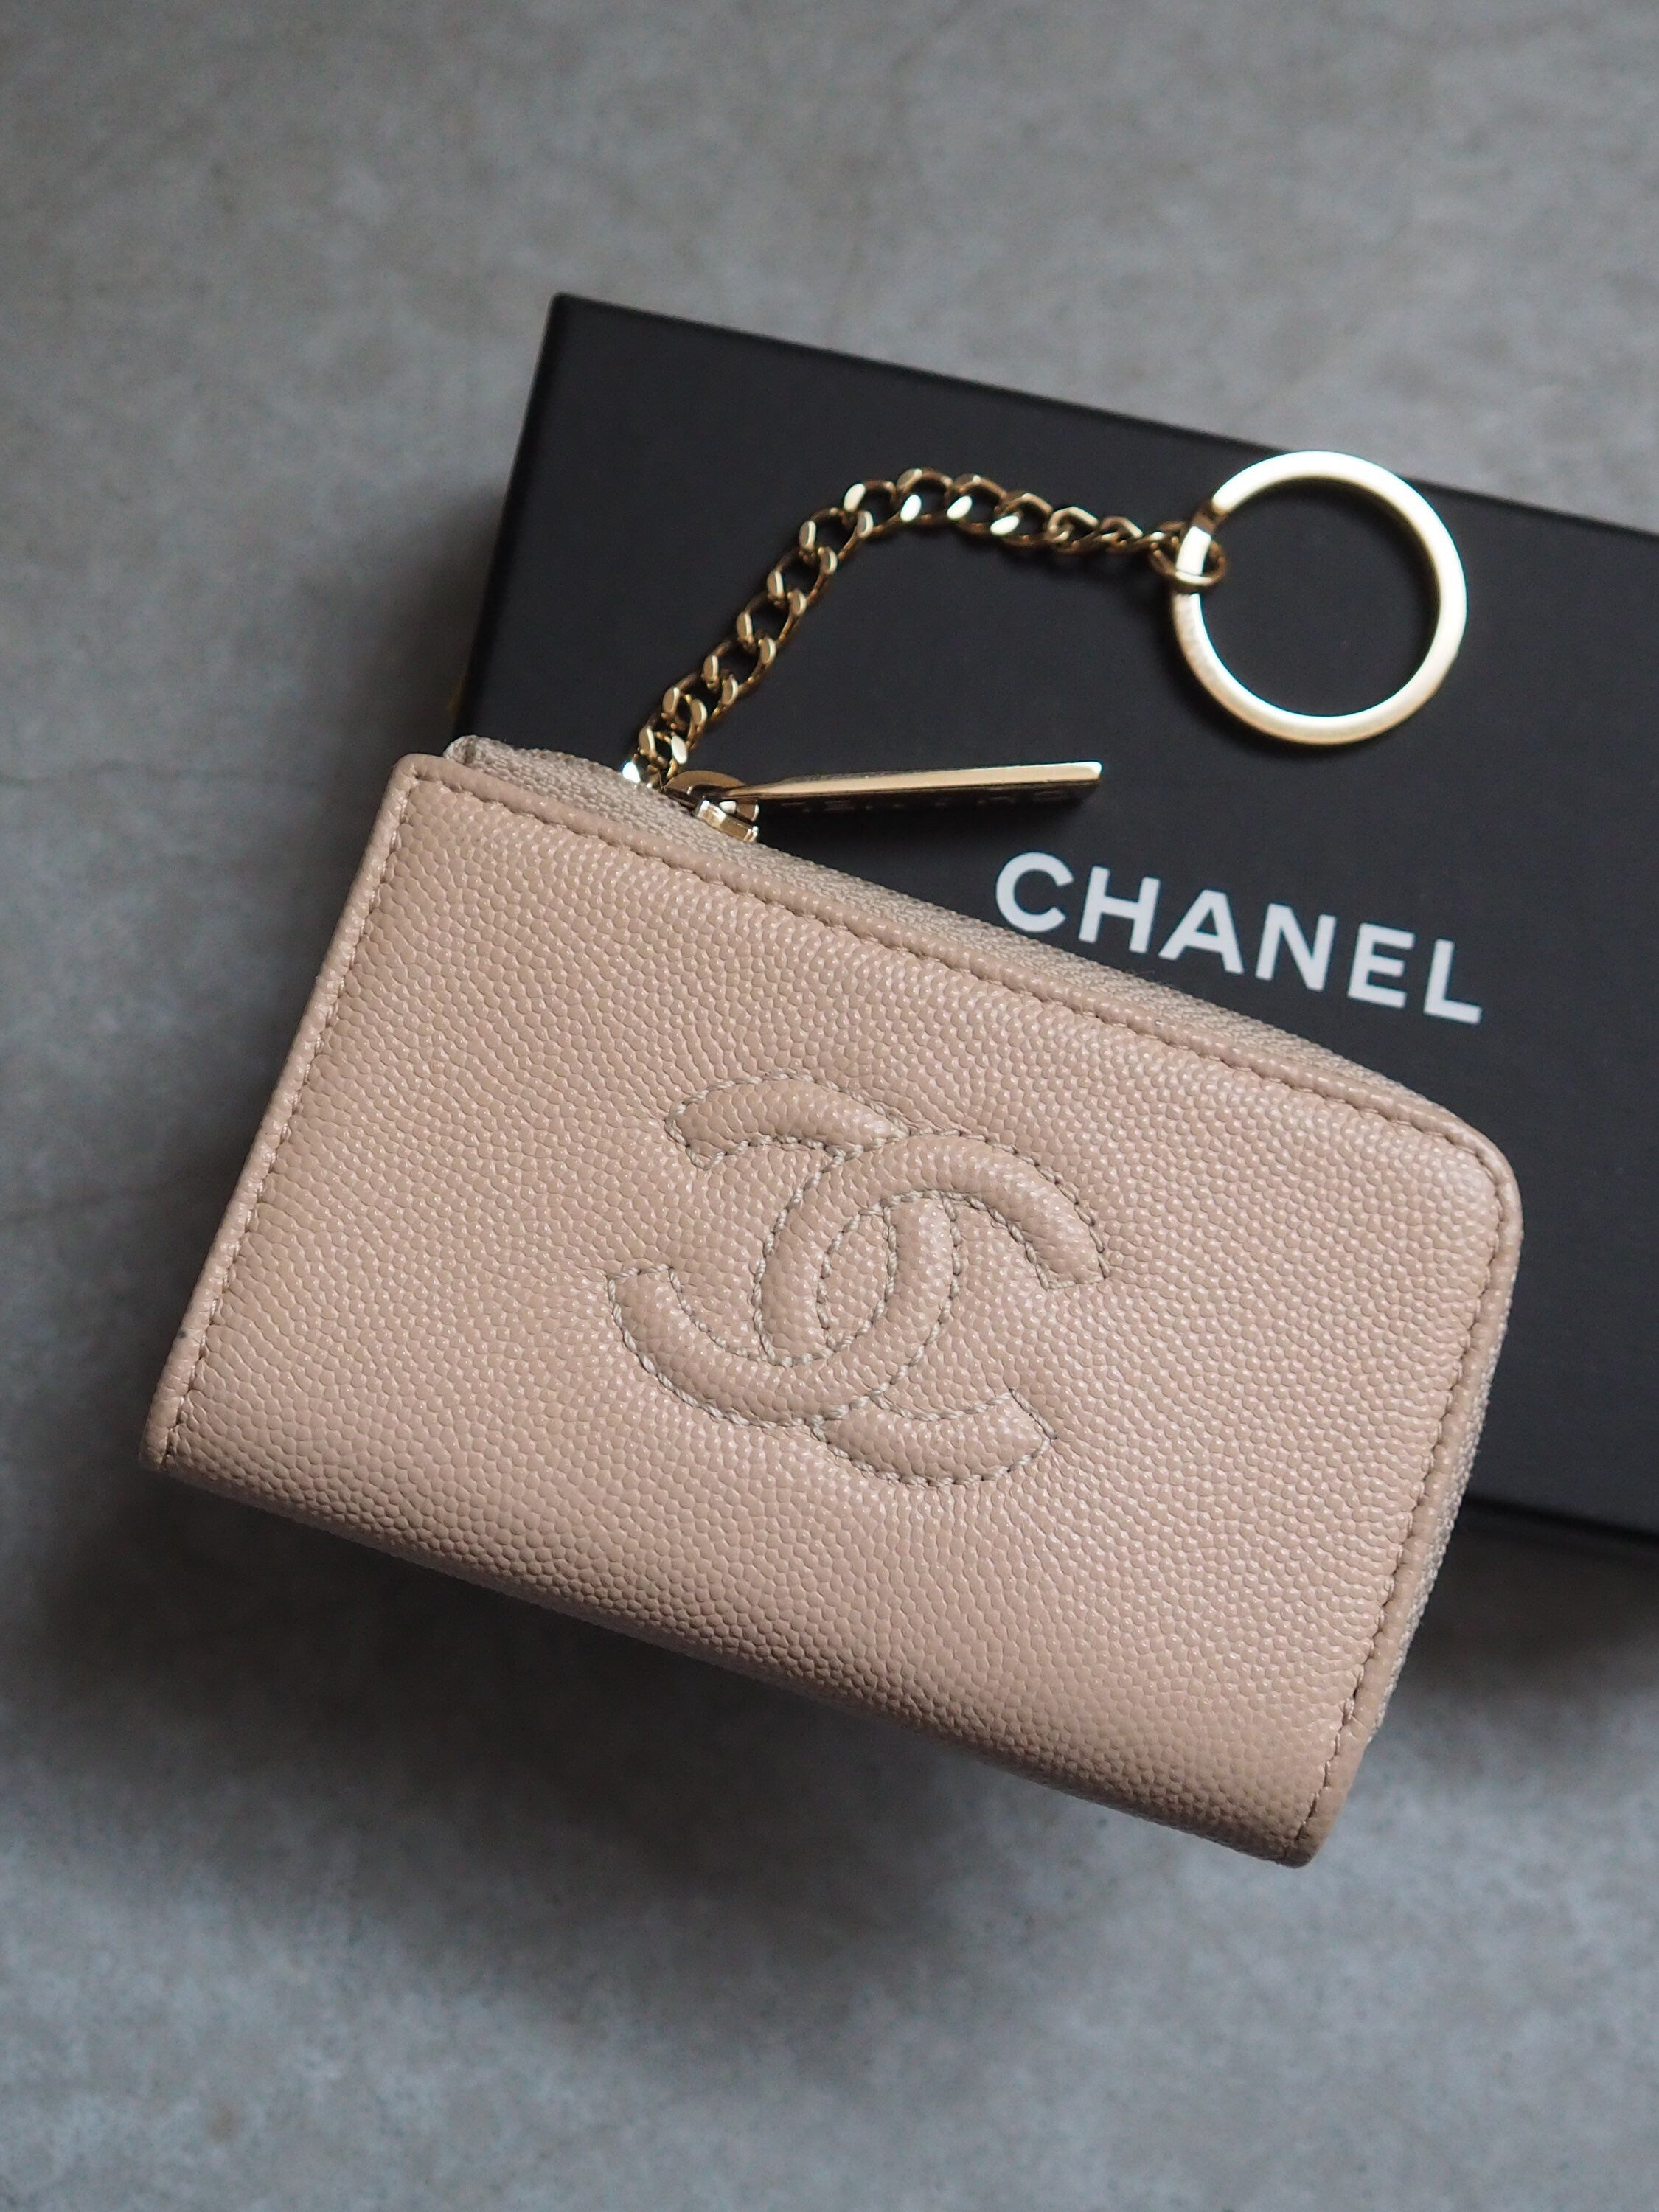 CHANEL COCO Coin Case Purse Key Chain Caviar Skin Leather Pink Beige Authentic Vintage Box